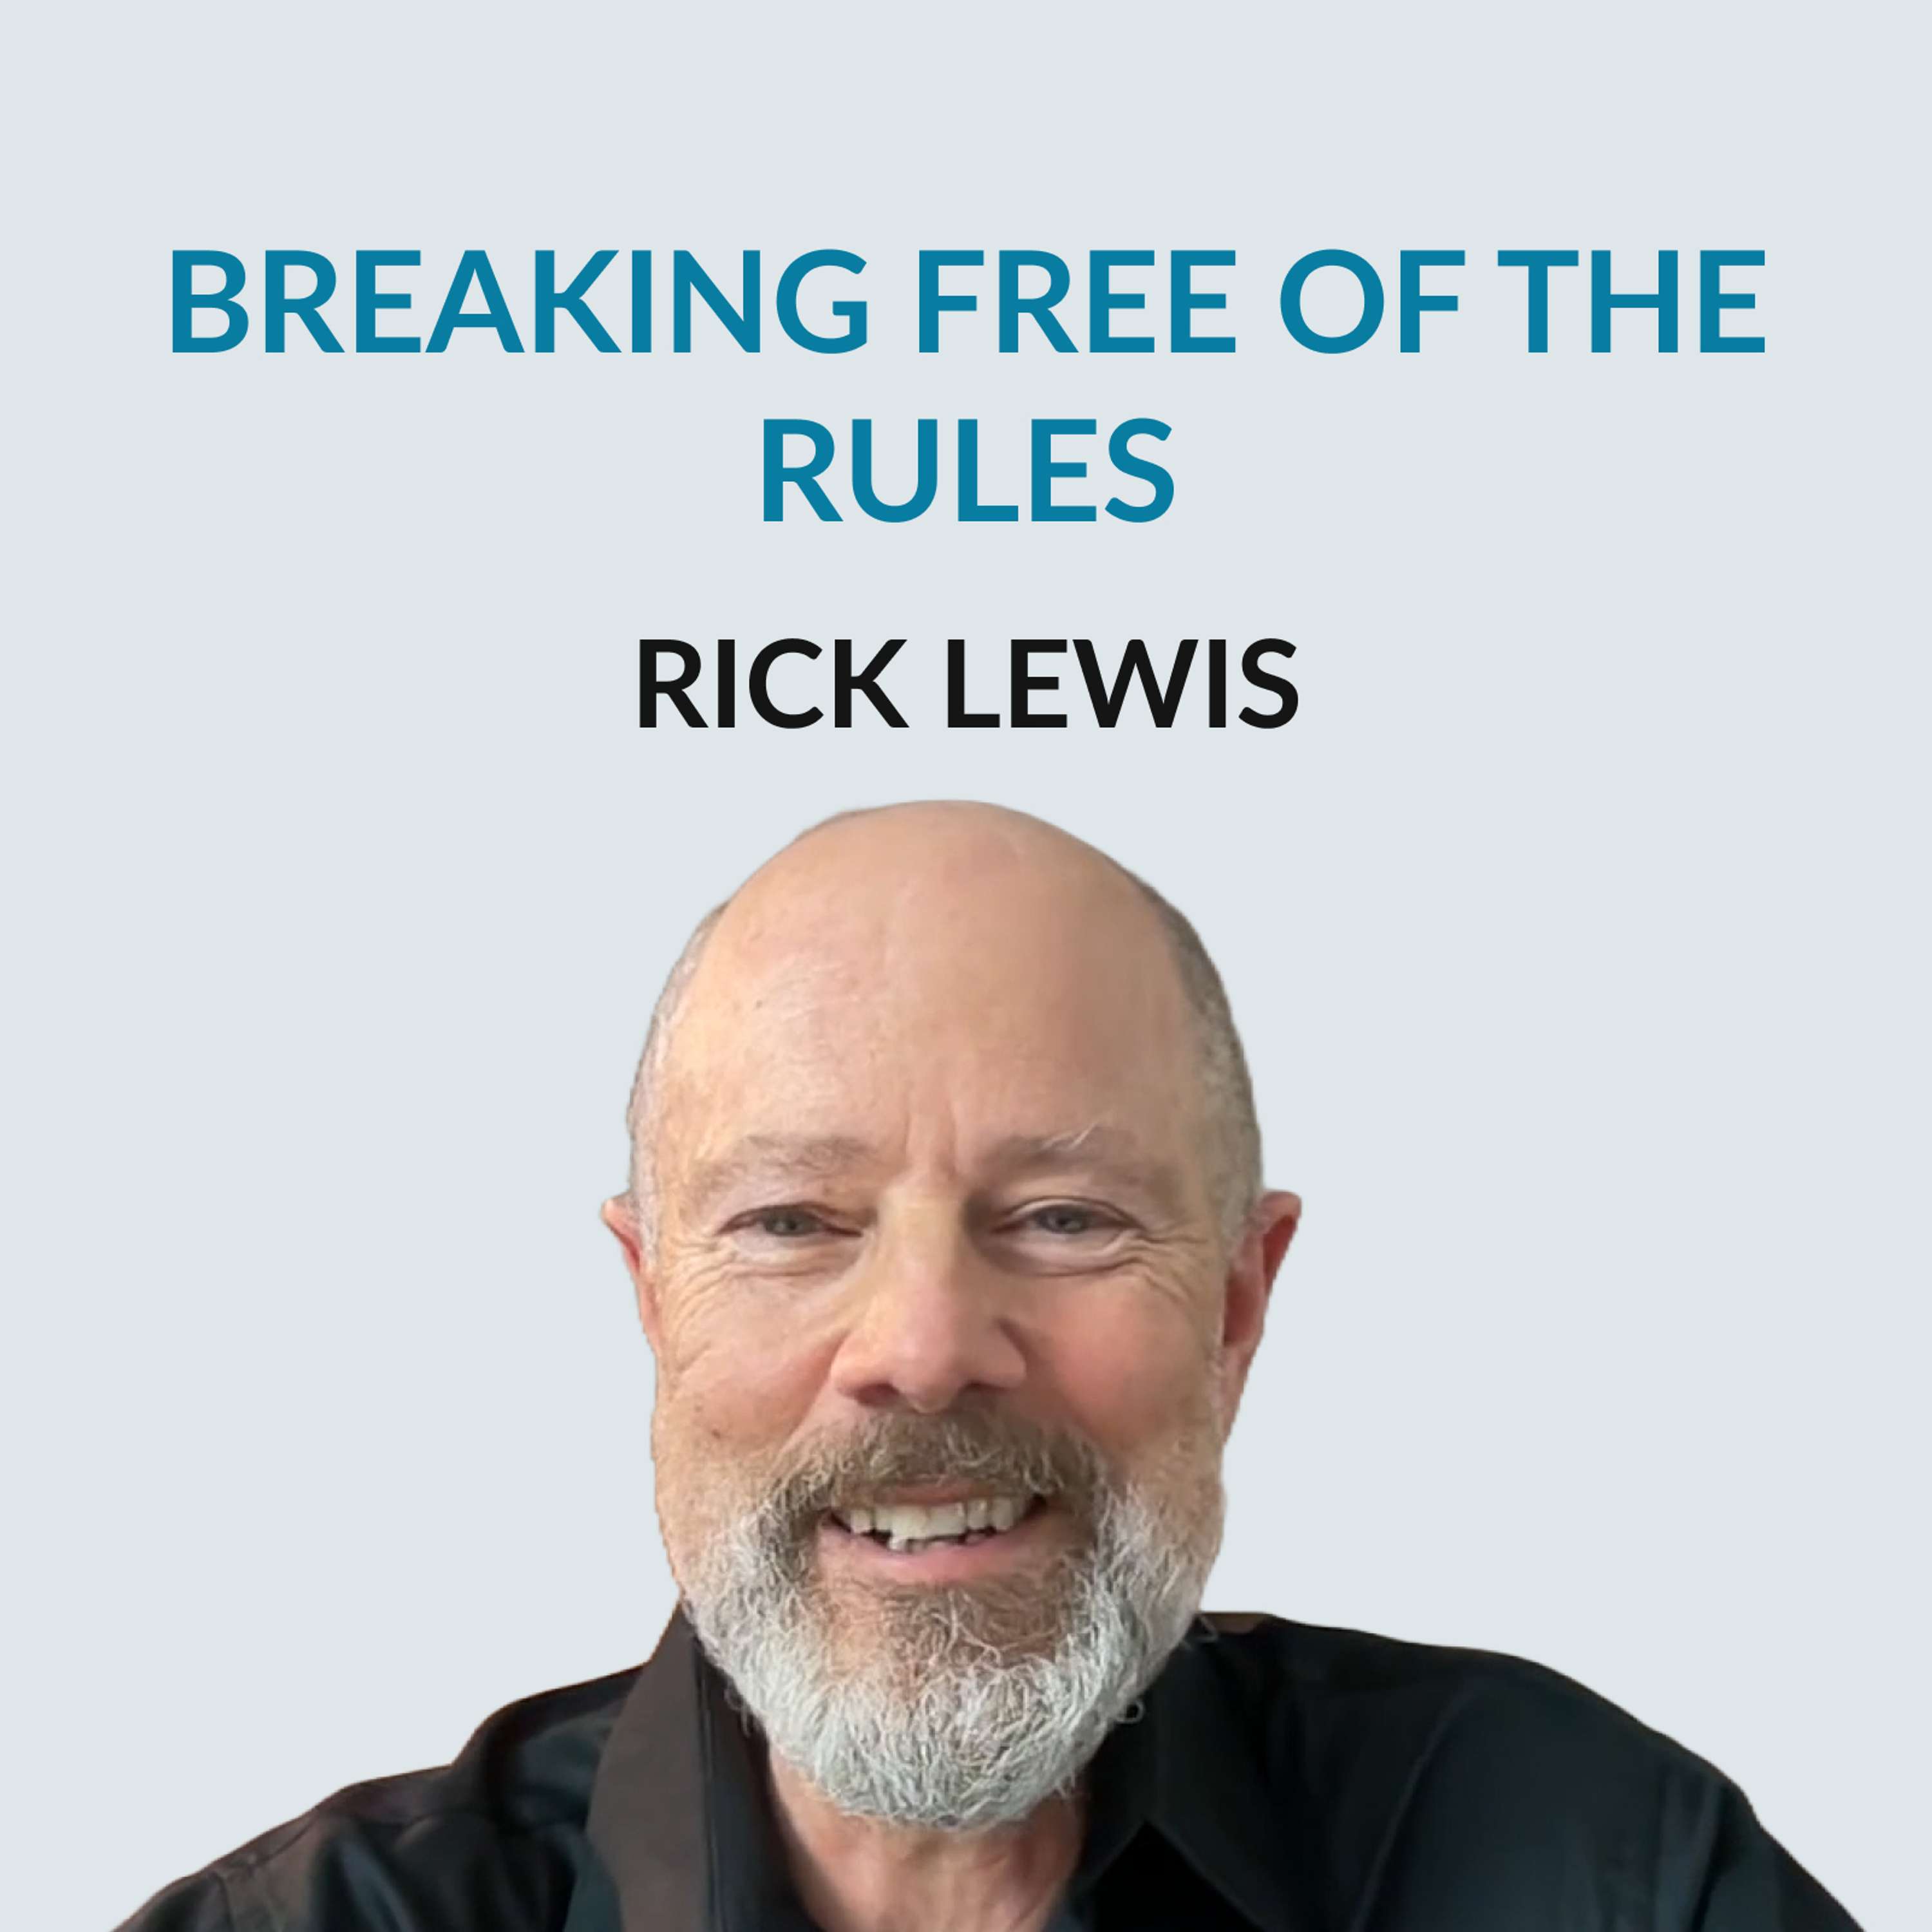 #166 Breaking Free of the Rules — Rick Lewis on being a child actor, dropping out of college, being a professional juggler, street performing and a clowning, the corporate world as an outsider, breaking rules, parenting and how to reinvent yourself